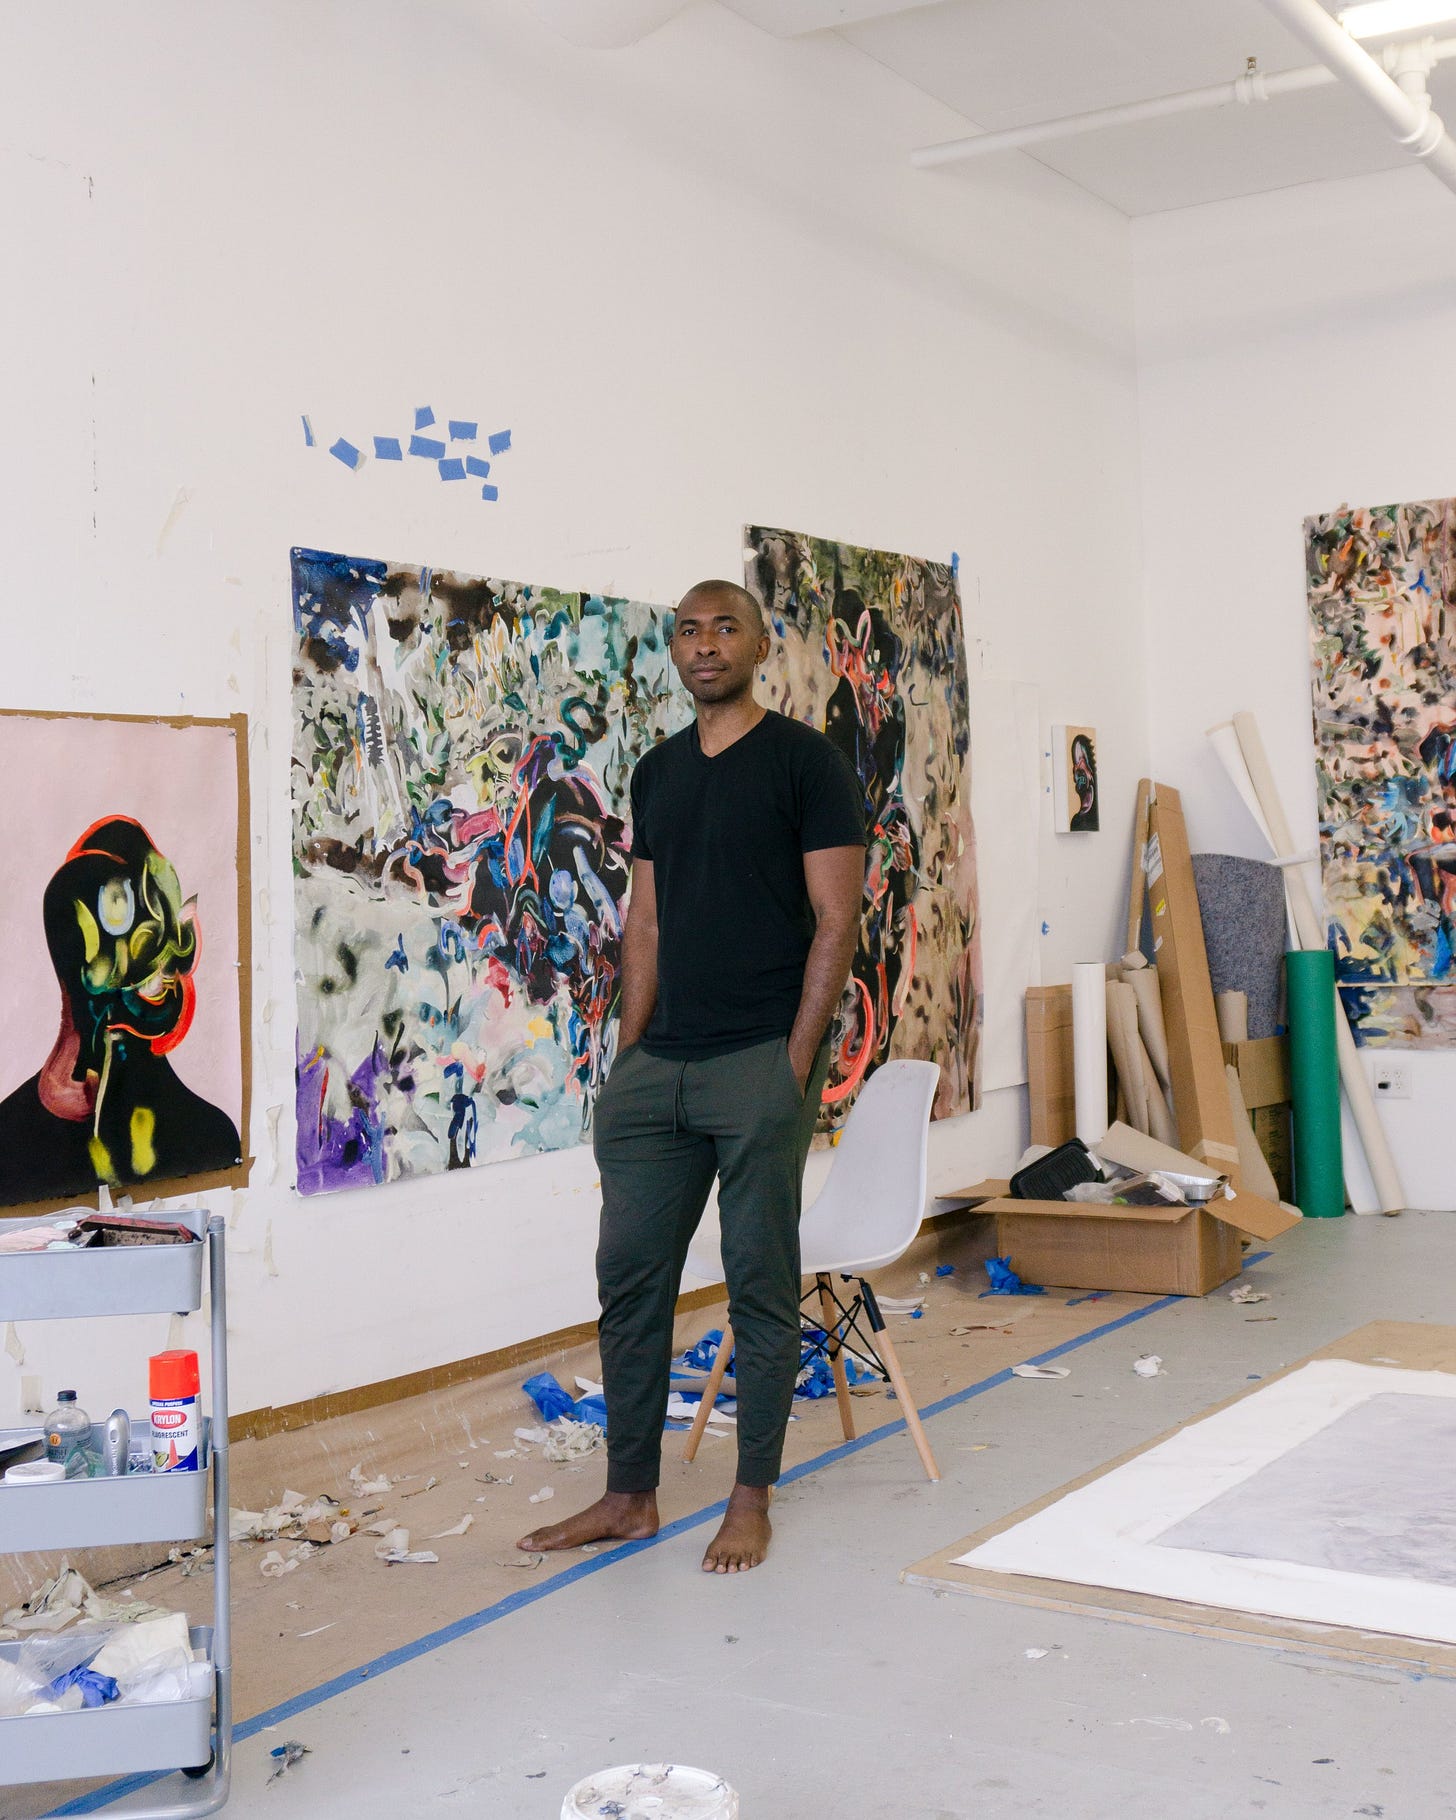 A Black person stands in a studio with his hands in his pockets. He is wearing a black T shirt and gray pants, and he is barefoot. To the right of him, colorful paintings are hung on the walls. The paintings are pink, blue, white, tan, and orange, a mix of abstract paint strokes and human like forms. 